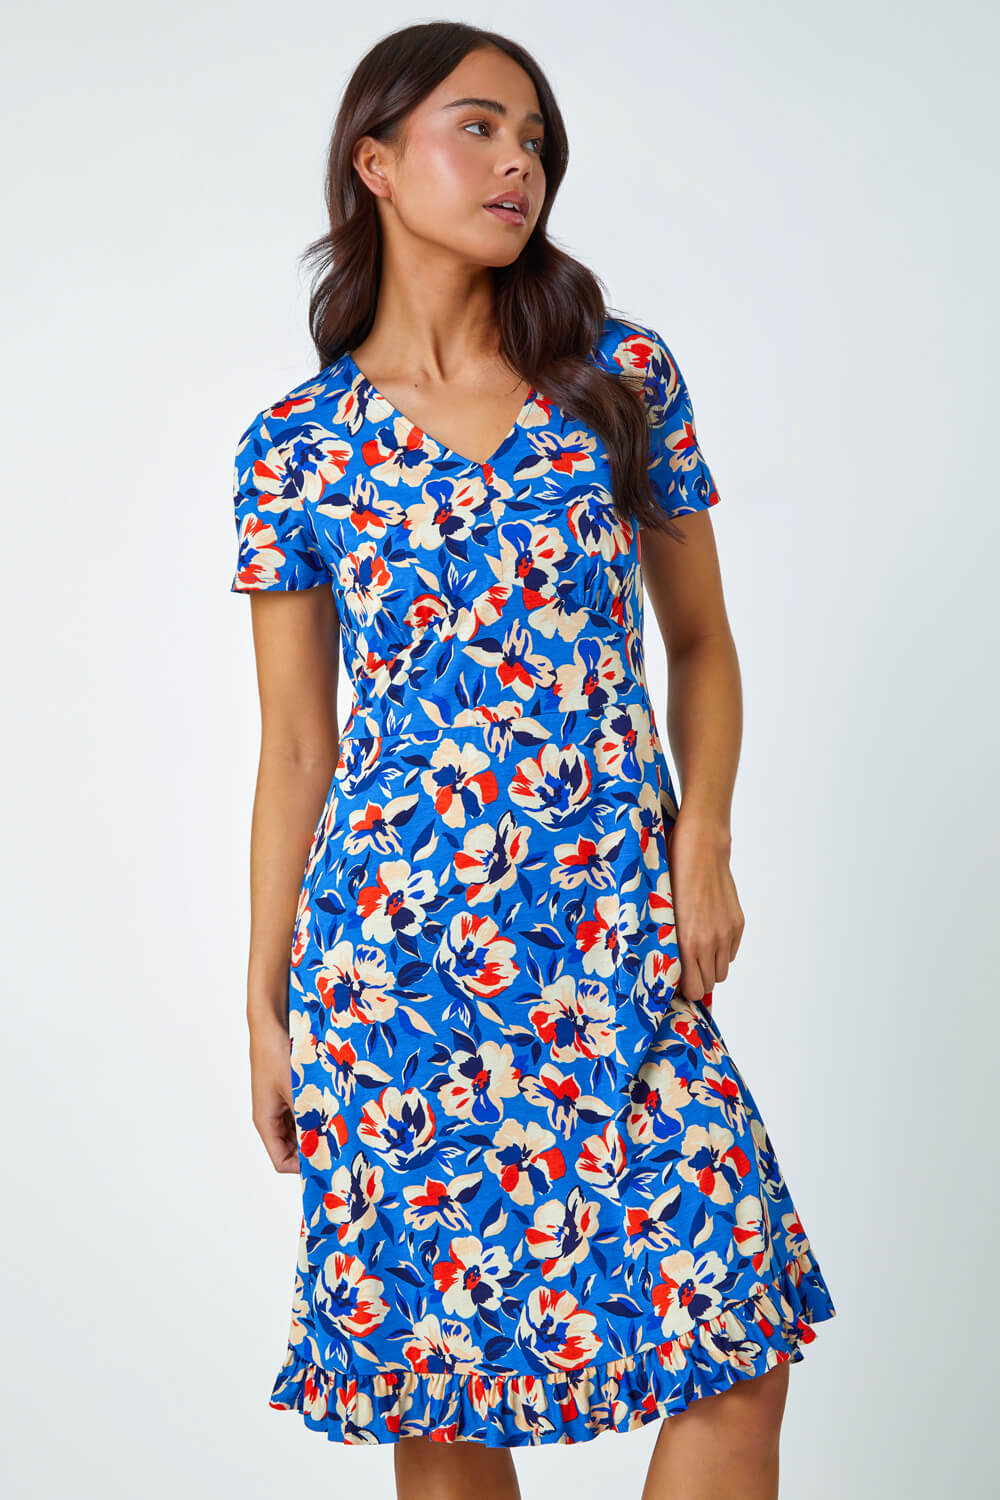 Turquoise Petite Floral Frill Hem Stretch Dress, Image 2 of 5